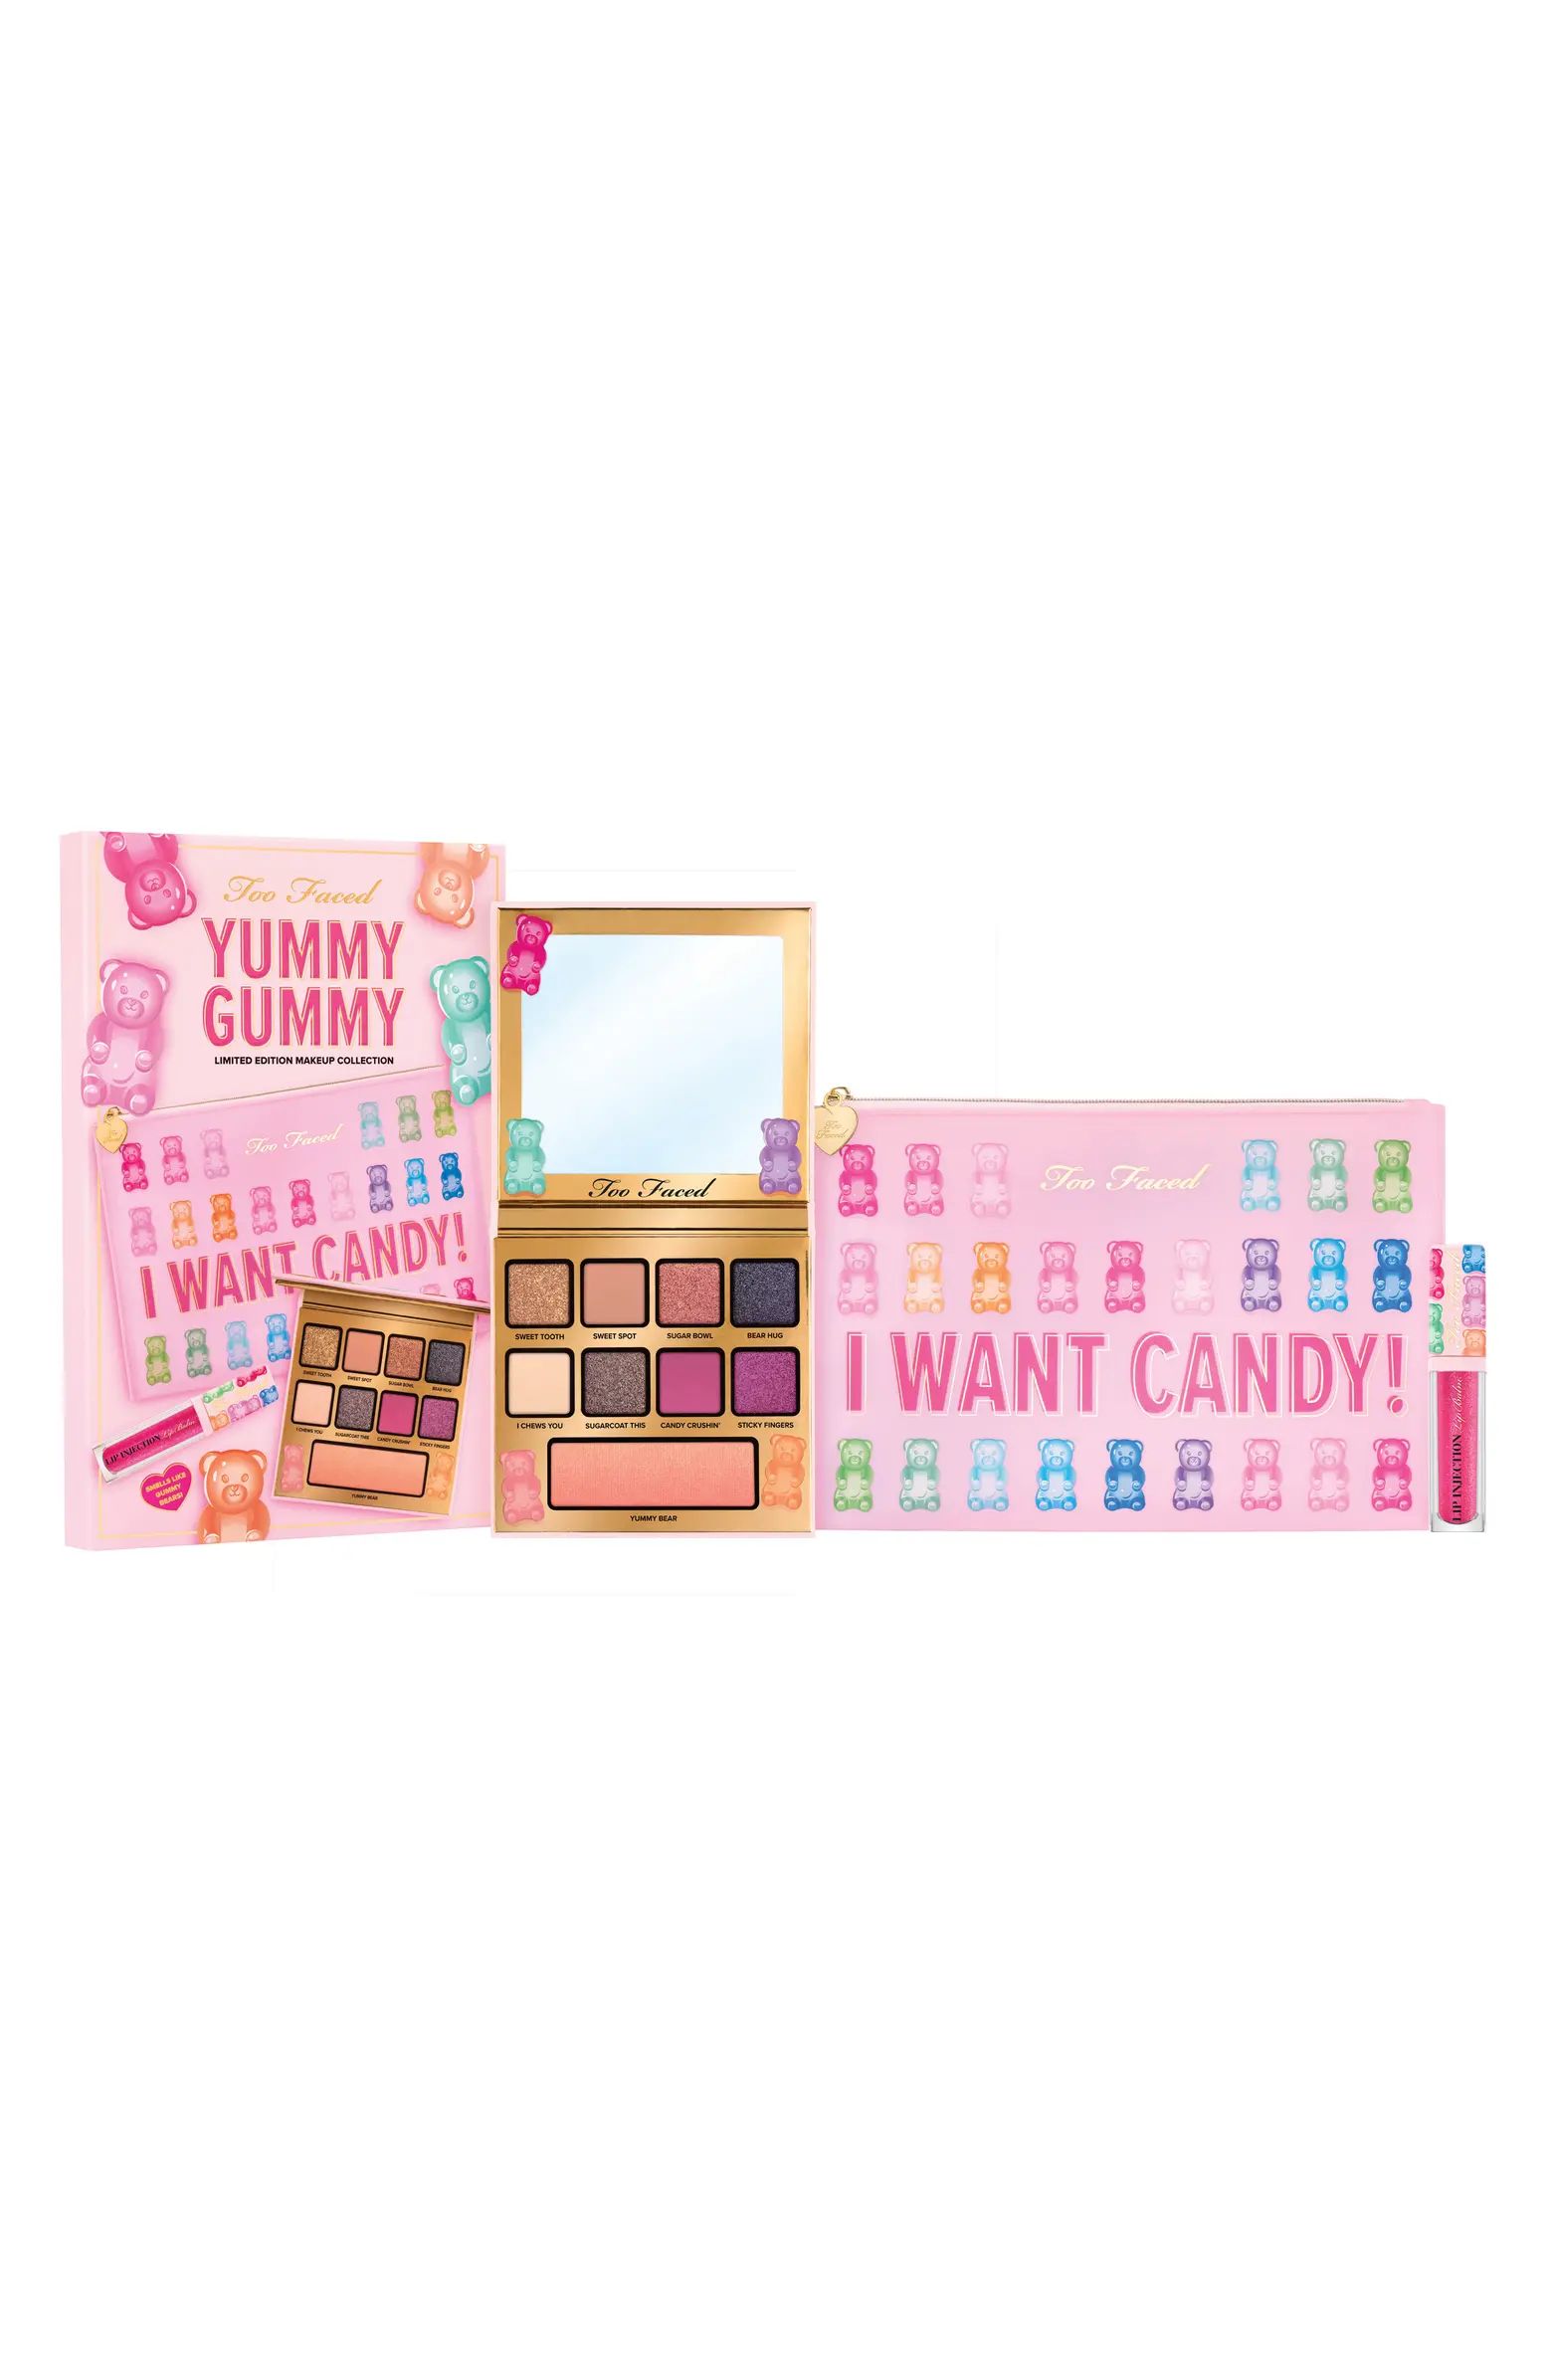 Yummy Gummy Limited Edition Makeup Collection | Nordstrom Rack